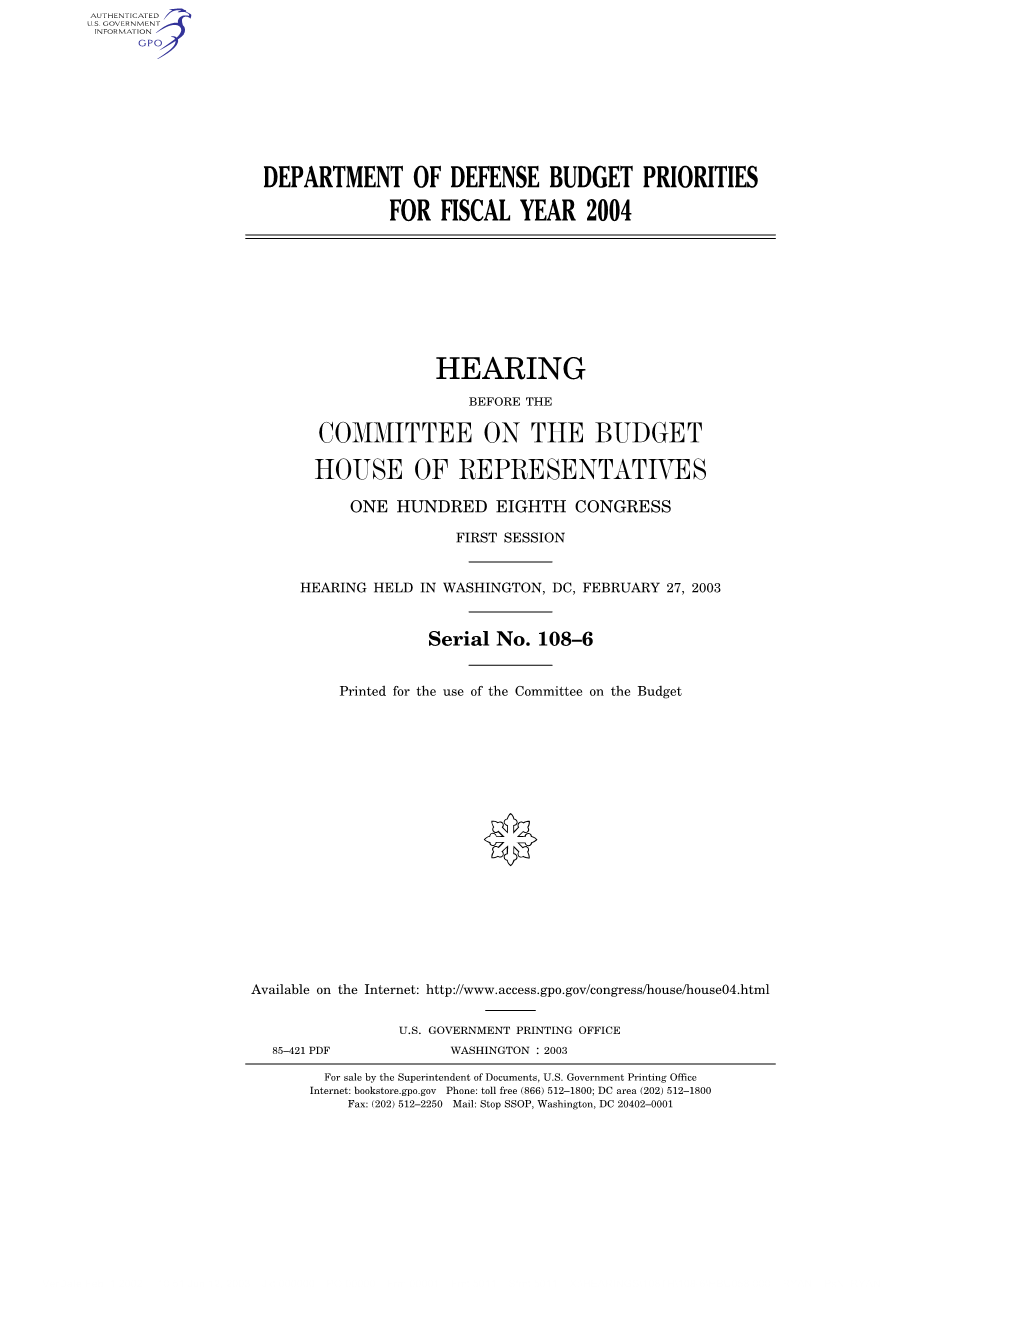 Department of Defense Budget Priorities for Fiscal Year 2004 Hearing